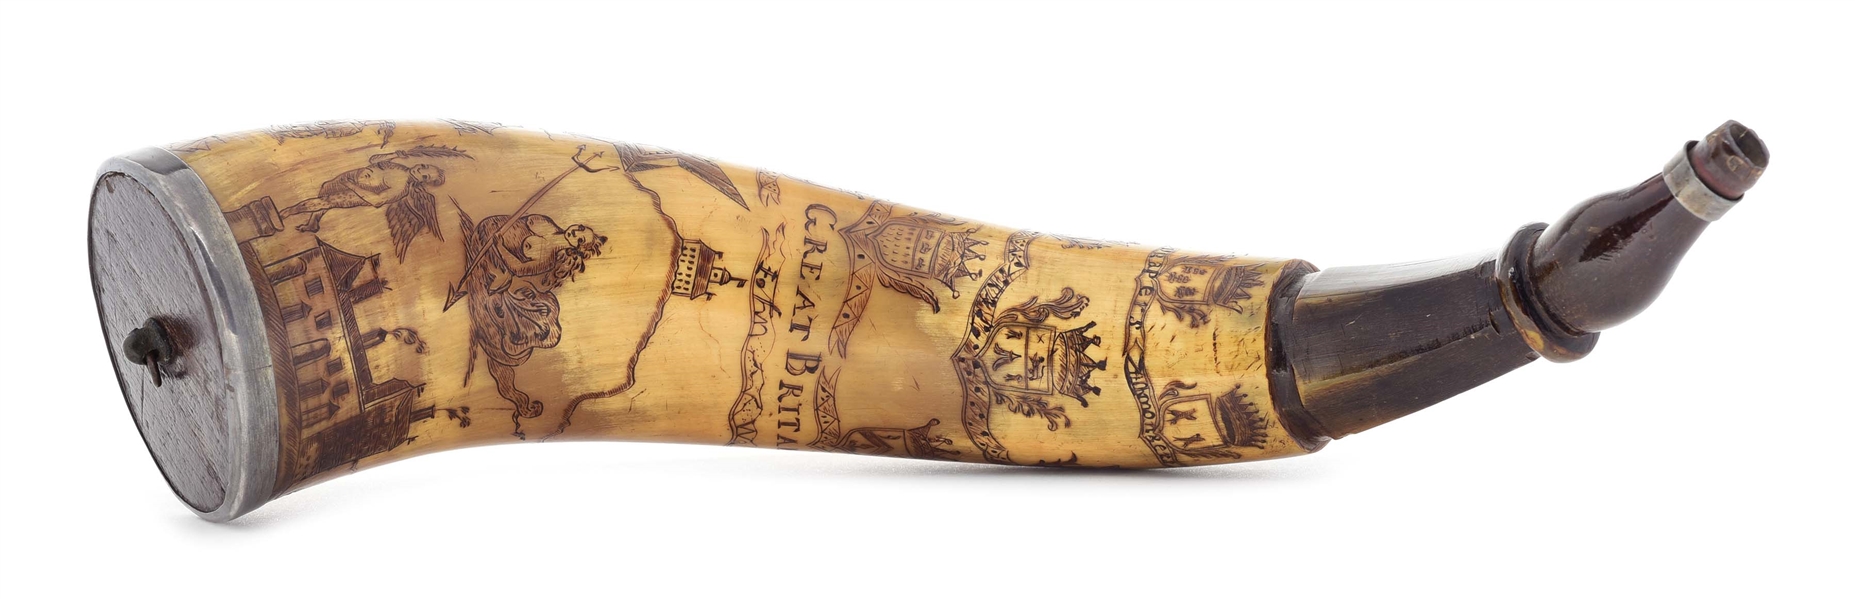 UNIQUE ENGRAVED POWDER HORN OF JOHN WALKEN INSCRIBED "GREAT BRITAINS WEALTH AND GLORY" ATTRIBUTED TO THE MASTER CARVER.